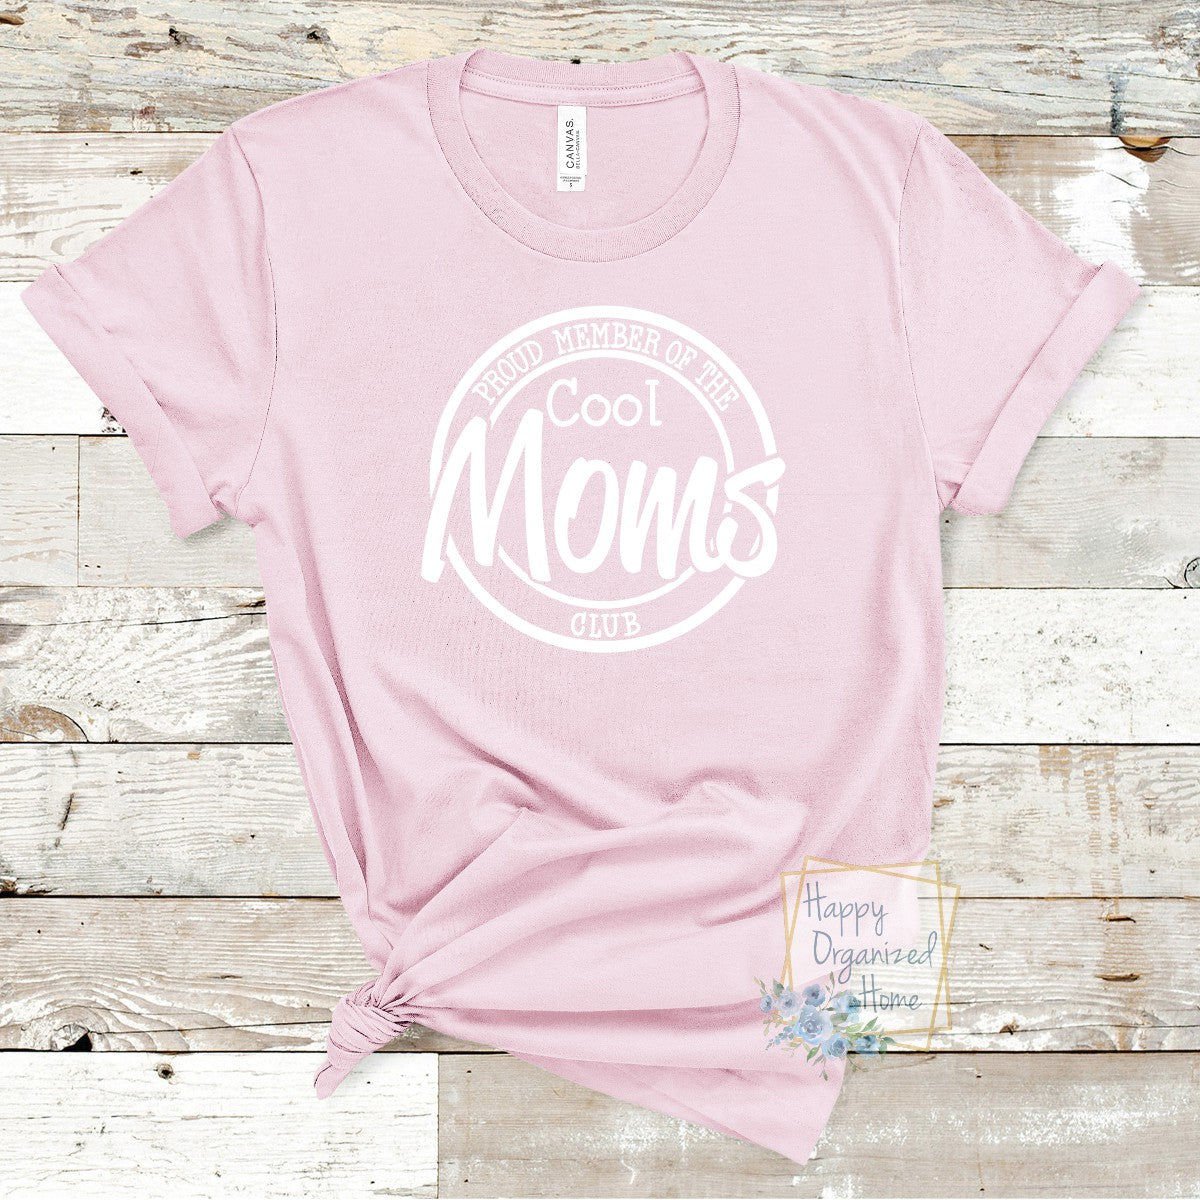 Proud Member of the Cool Moms Club - Unisex Apparel